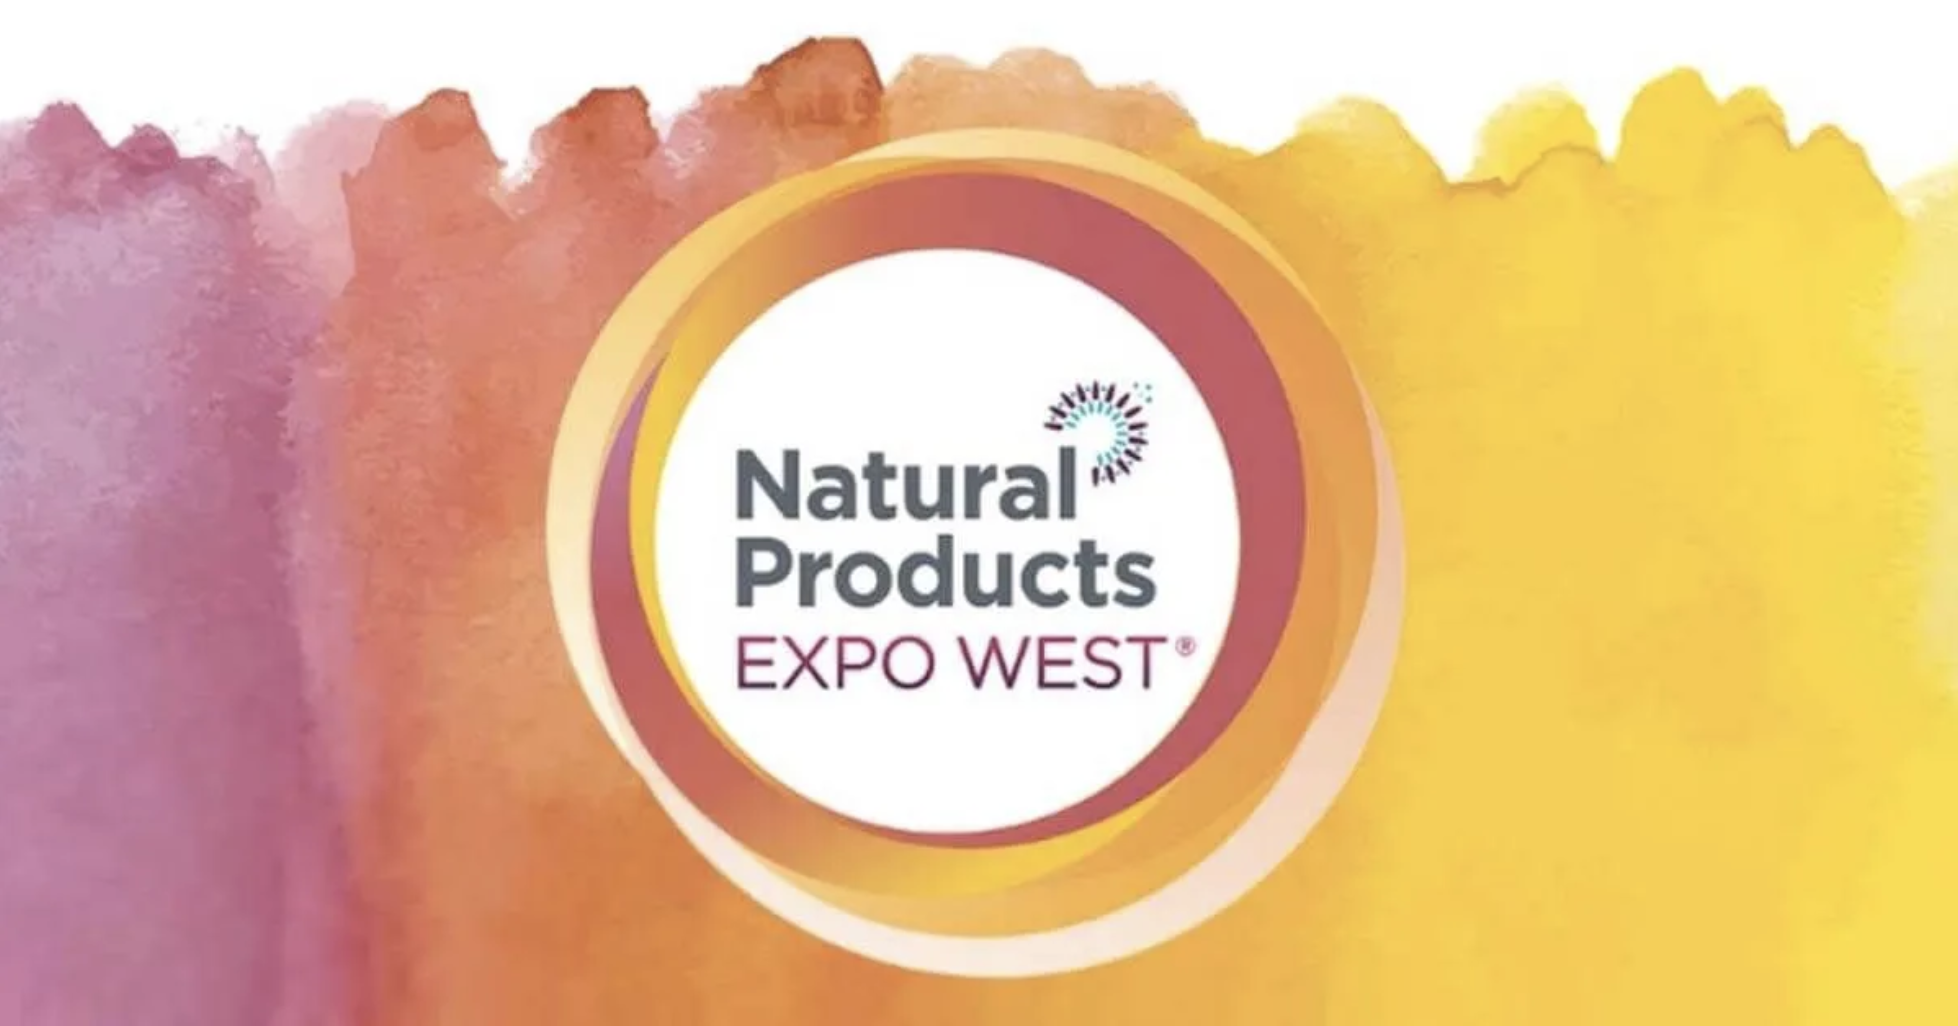 Publicity For Good and Elite Brands Unite Serving Purpose at Expo West